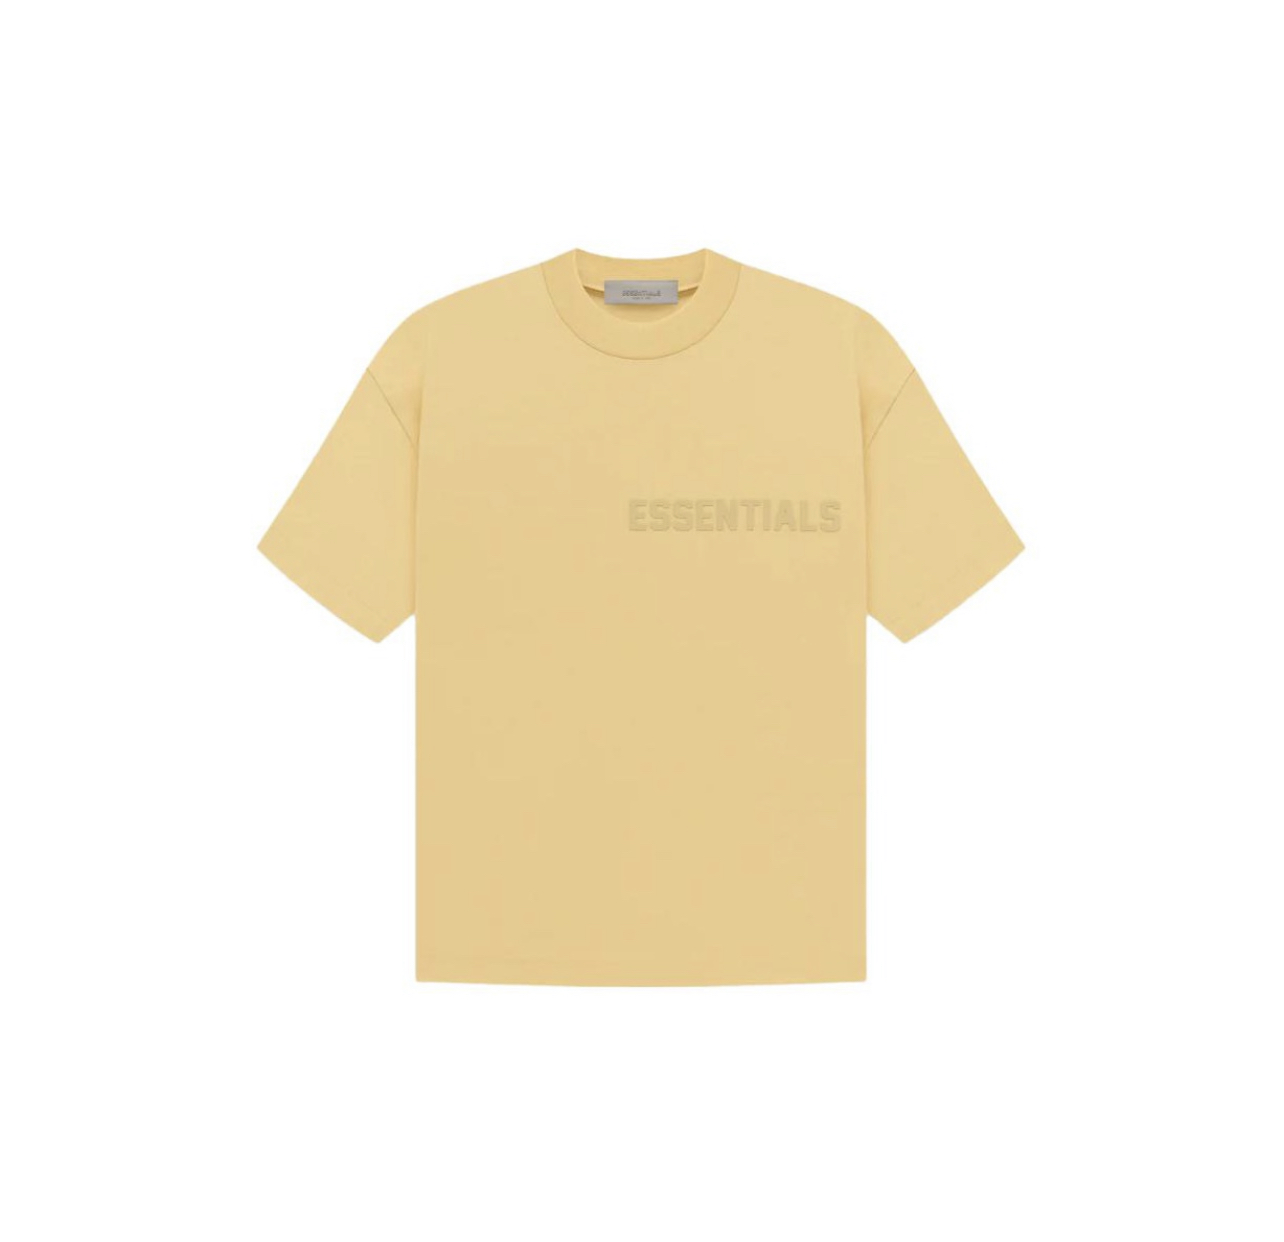 FEAR OF GOD ESSENTIALS FW22 SS22 LIGHT TUSCAN TEE